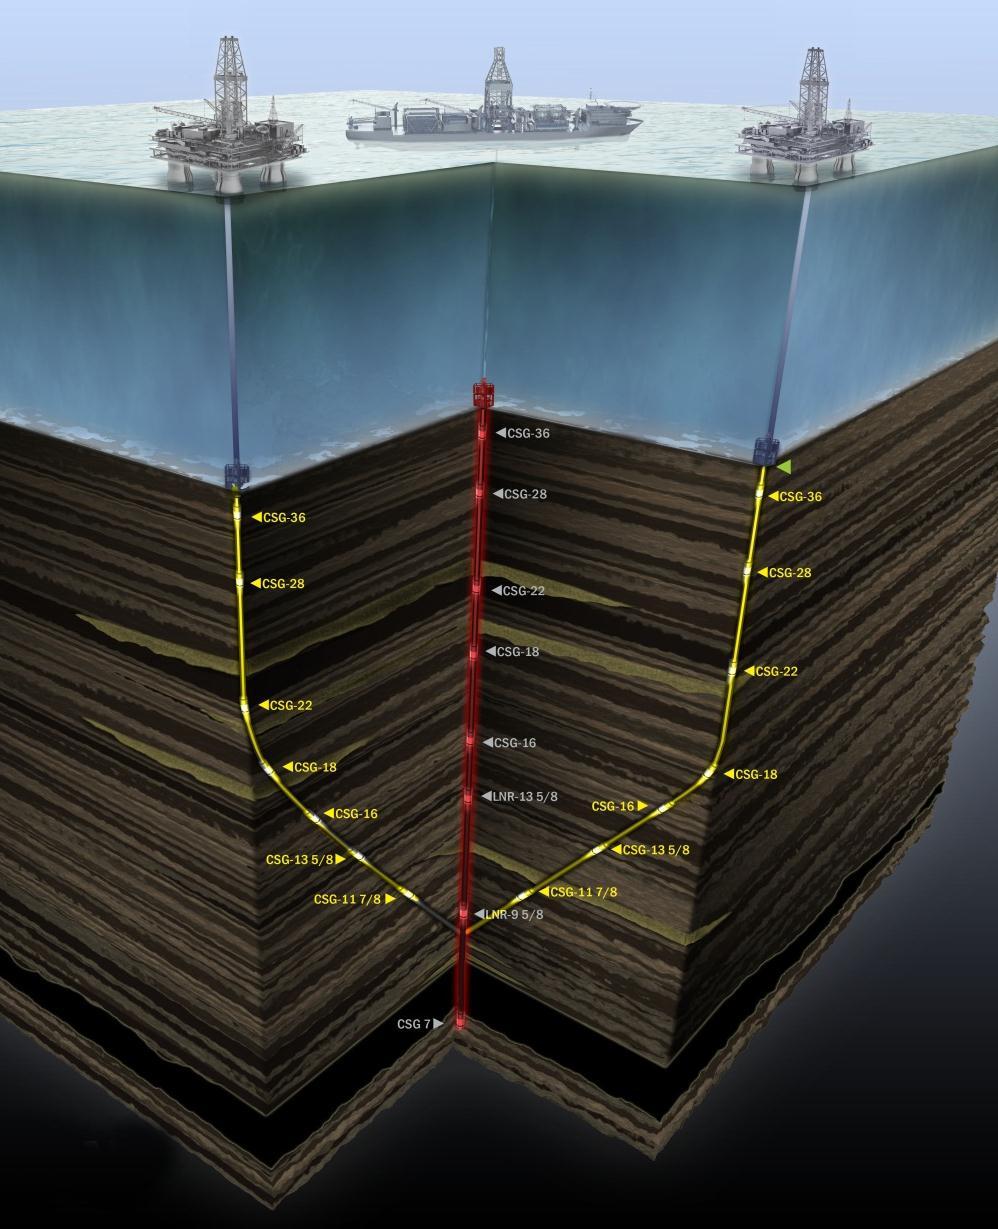 Relief Wells Rapid intersect and bottom well kill Deepwater Horizon experience Advances in Ranging Technology Relief well was final confirmation that well had been killed Going forward BP Pre-Spud